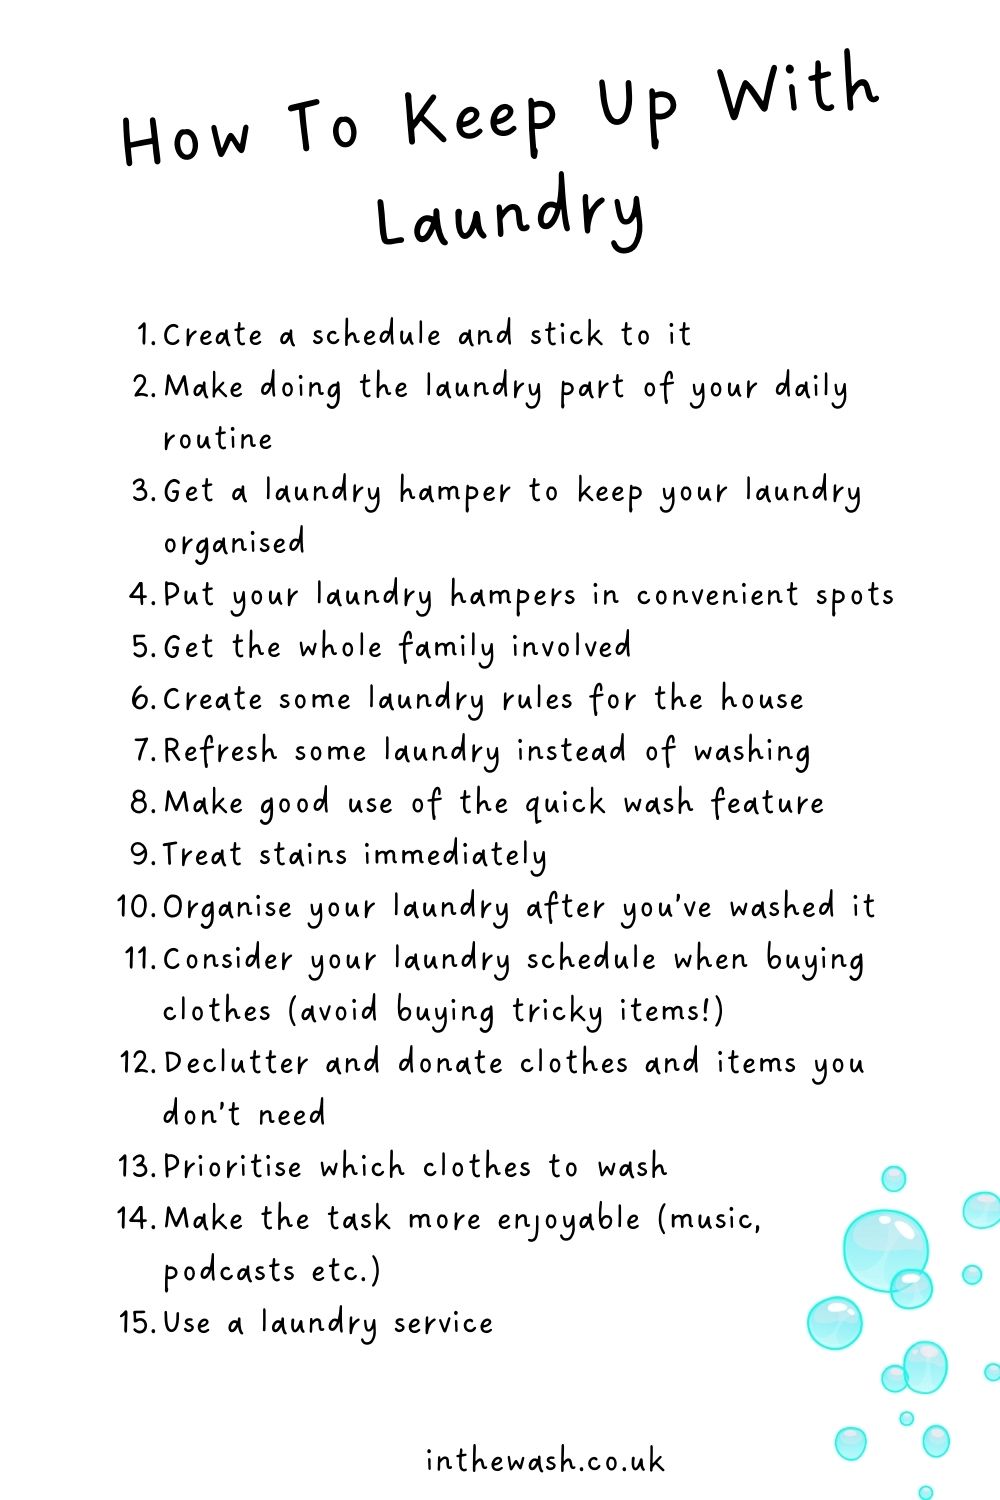 How to Keep Up With Laundry